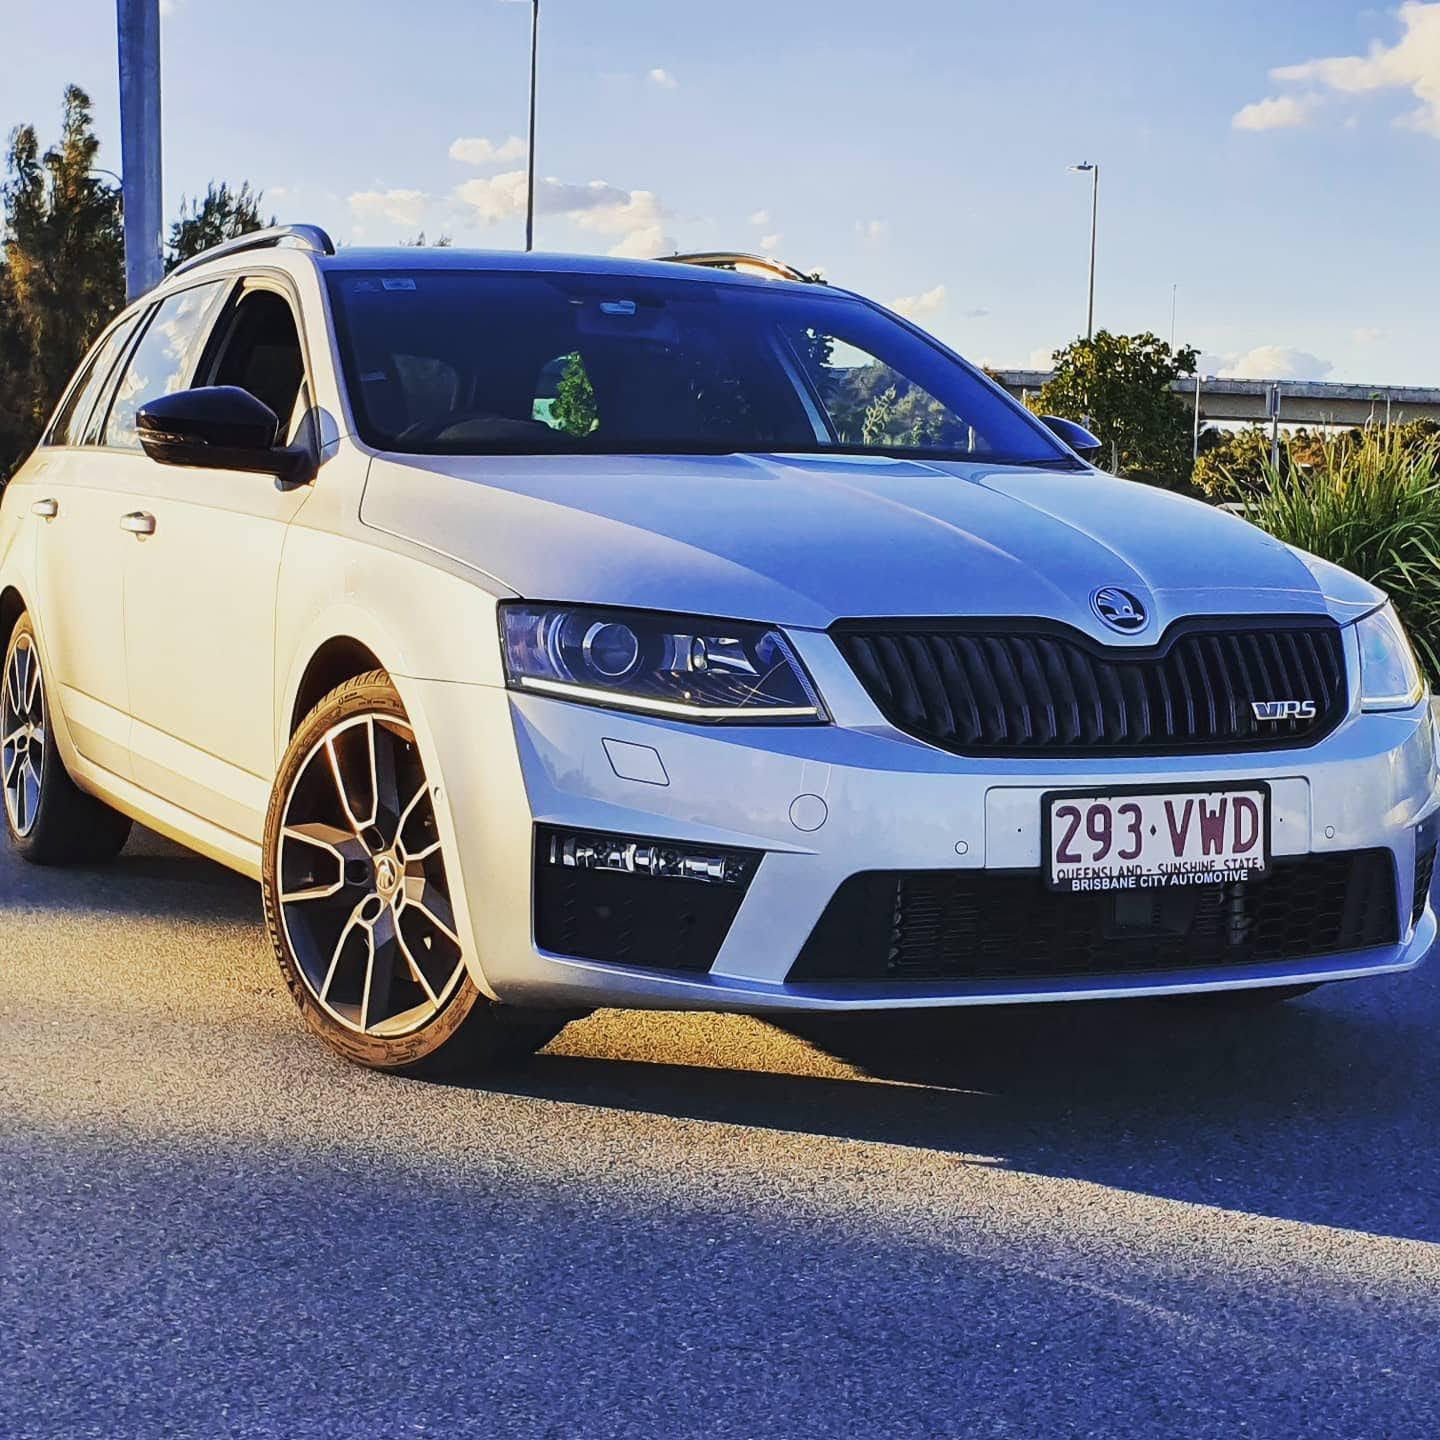 2015 Skoda Octavia RS: owner review - Drive